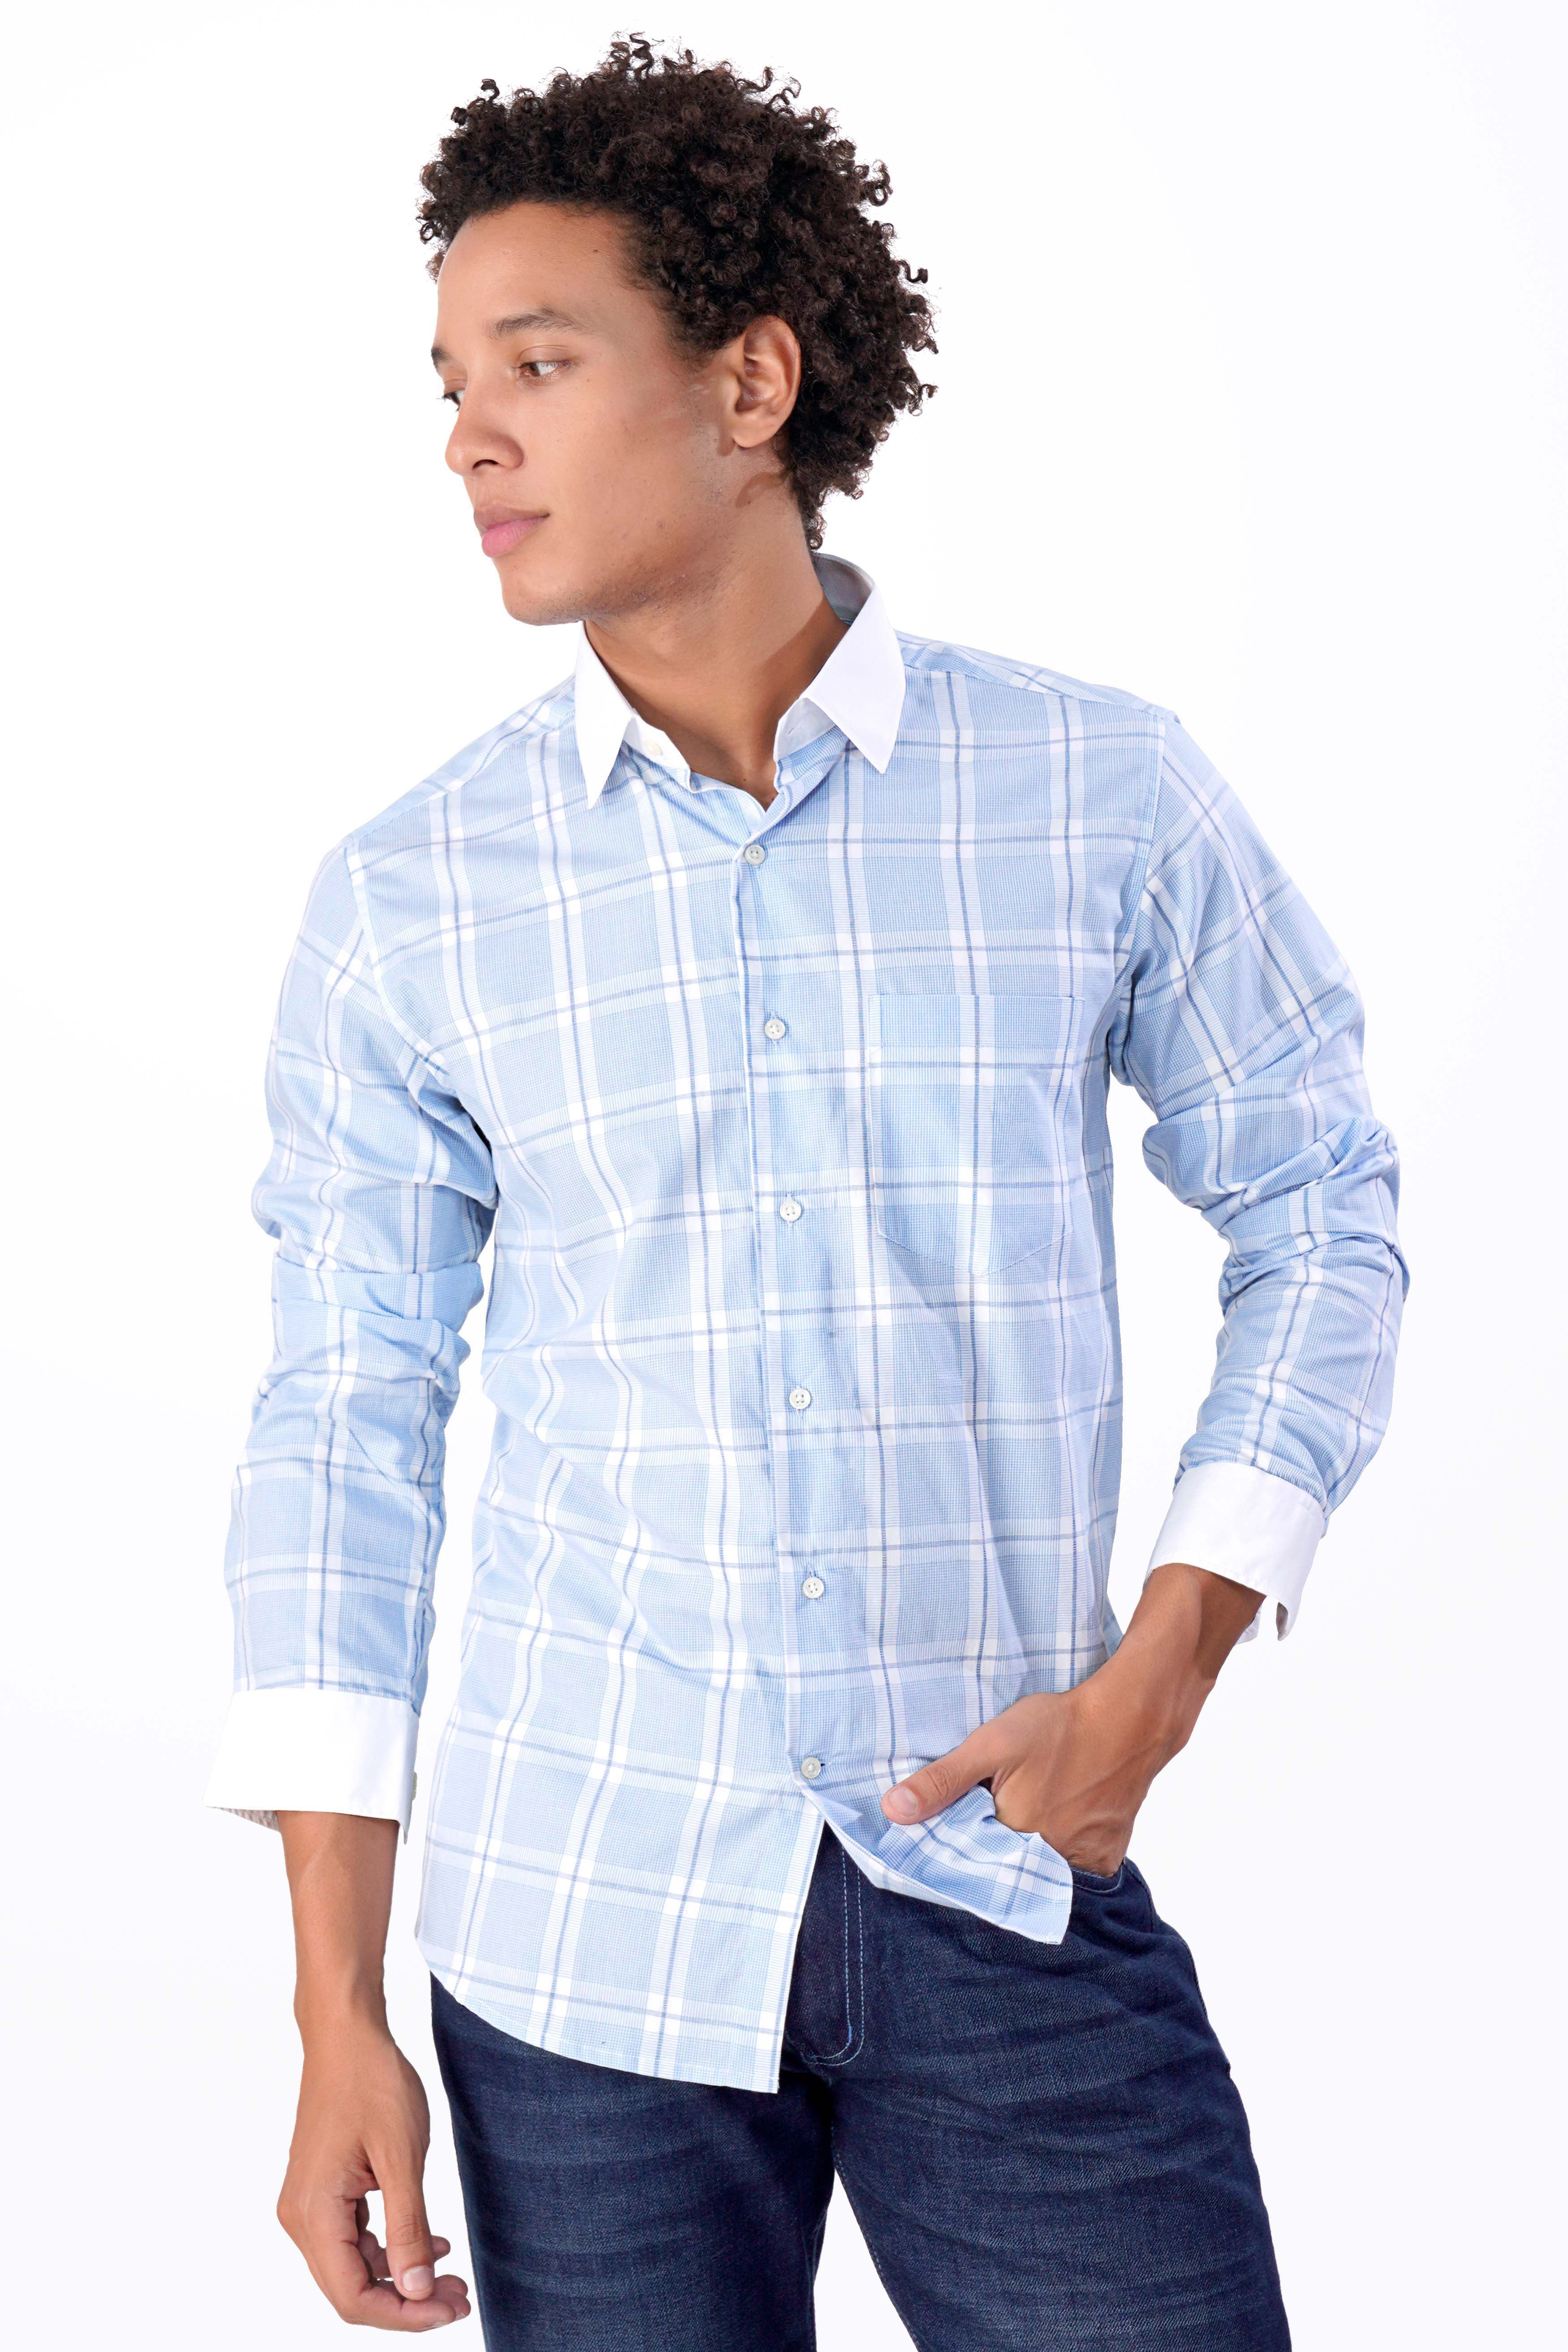 Glacier Blue and White Plaid with White Cuffs and Collar Dobby Textured Premium Giza Cotton Shirt